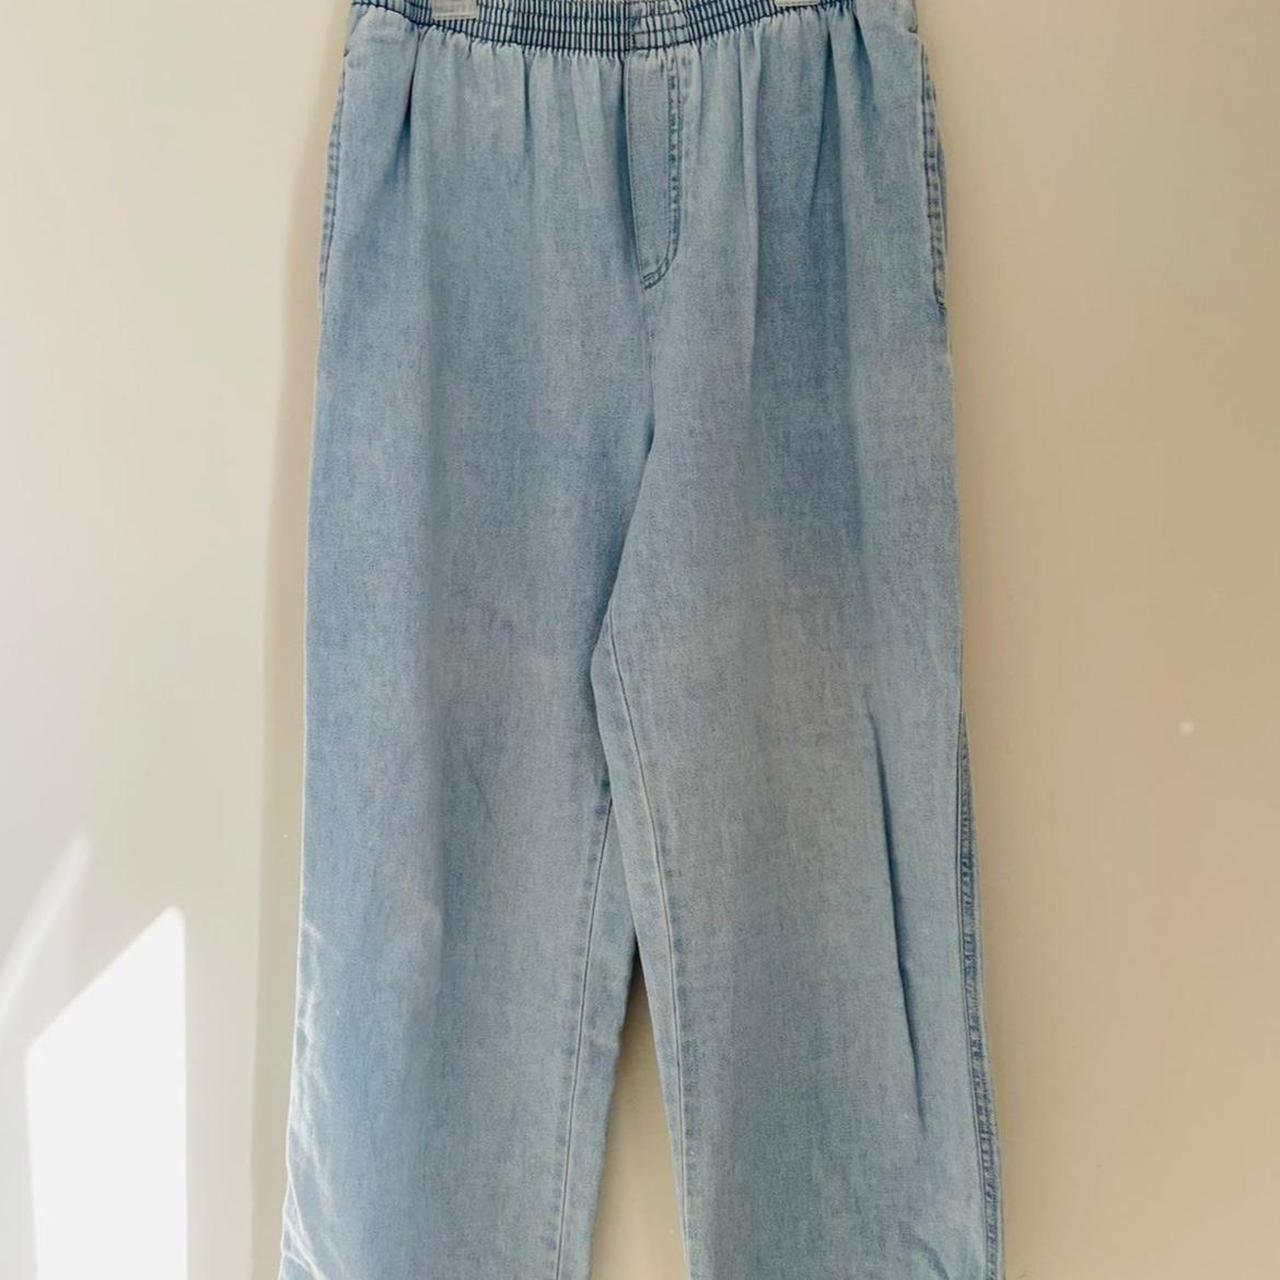 Casual blue pants by Basic Editions, women's size - Depop